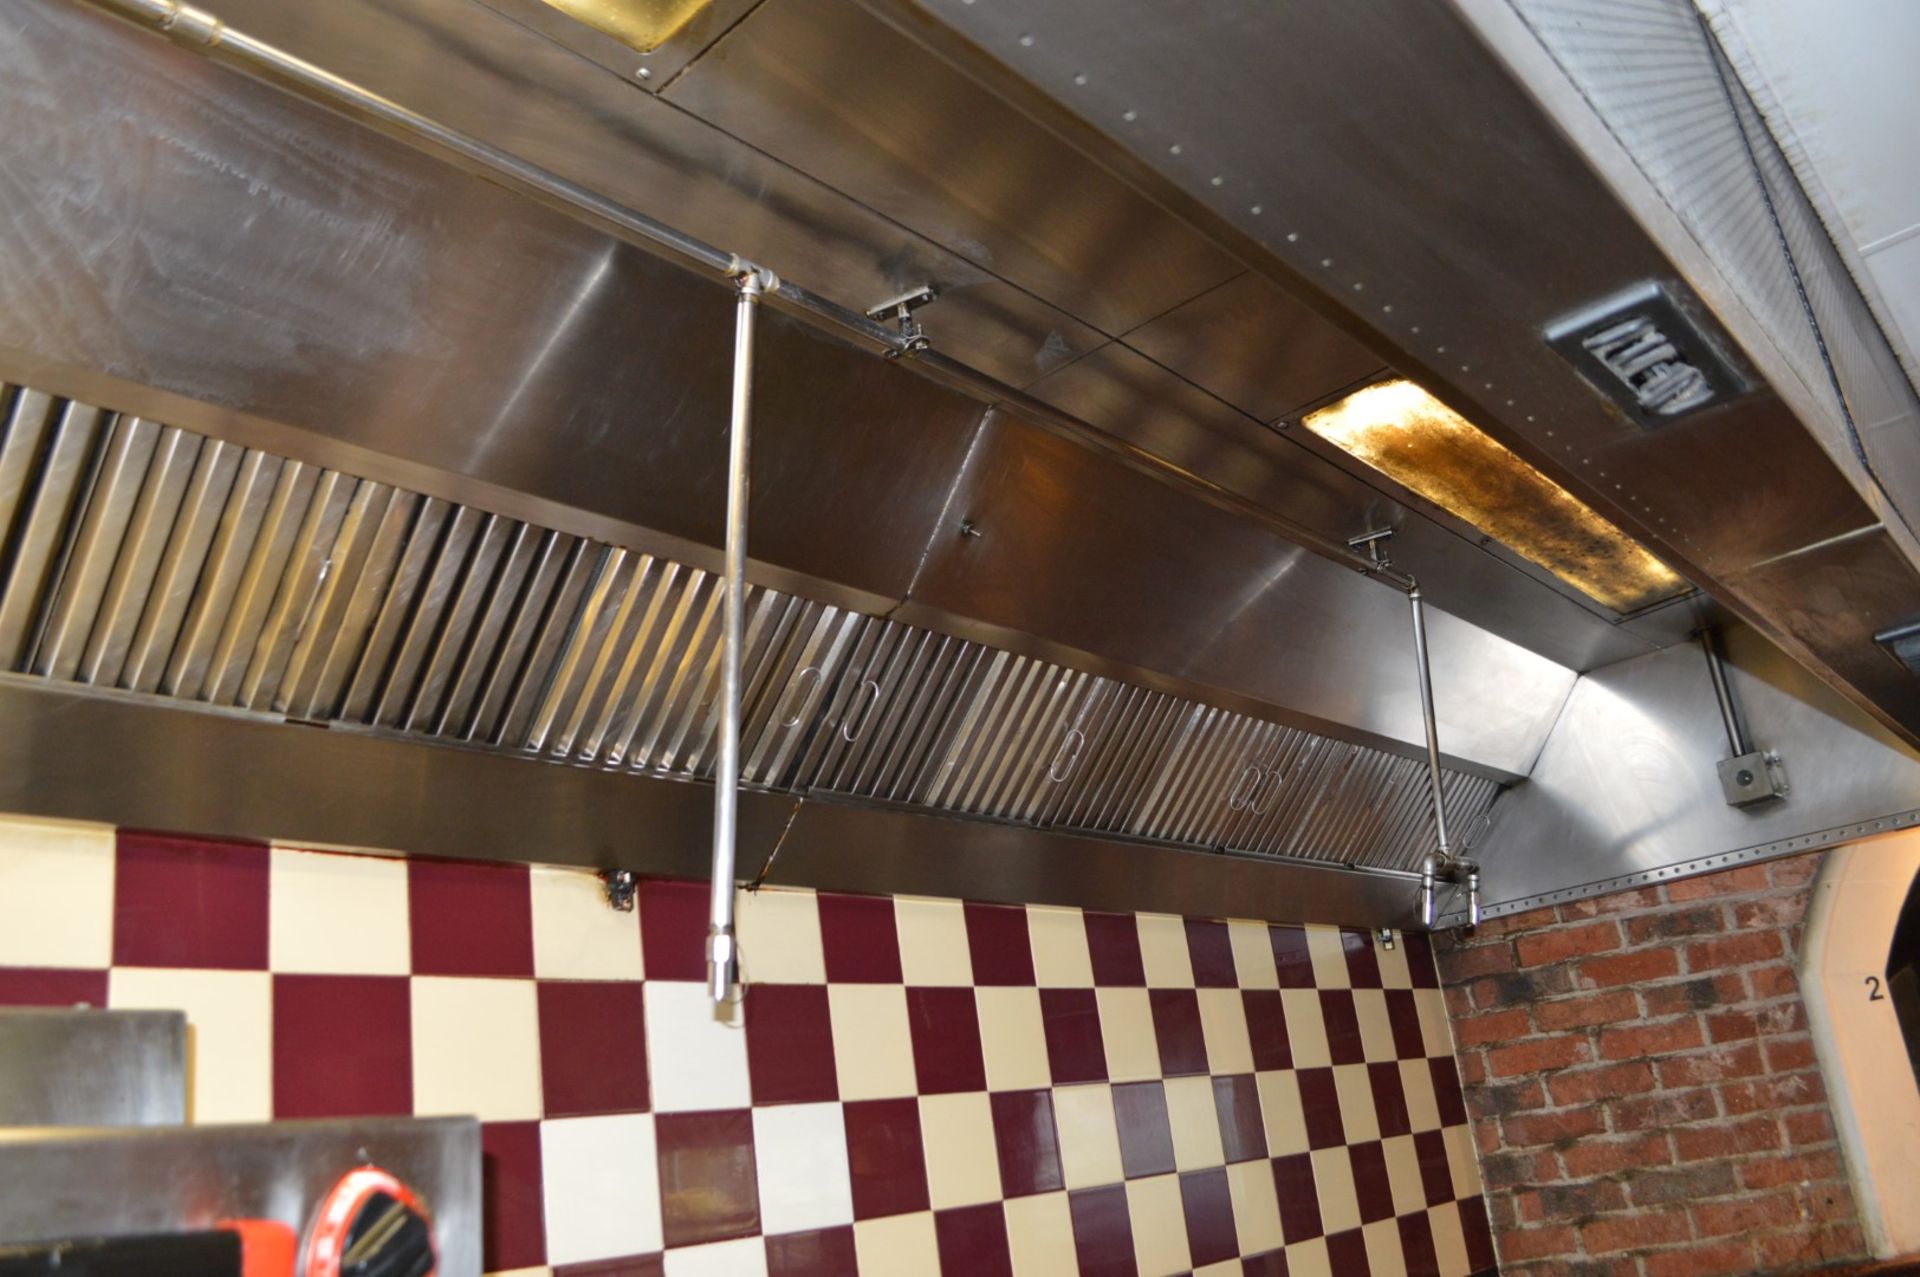 1 x Commercial Stainless Steel Kitchen Extractor Canopy With Ansul R-102 Fire Suppression System - - Image 5 of 13